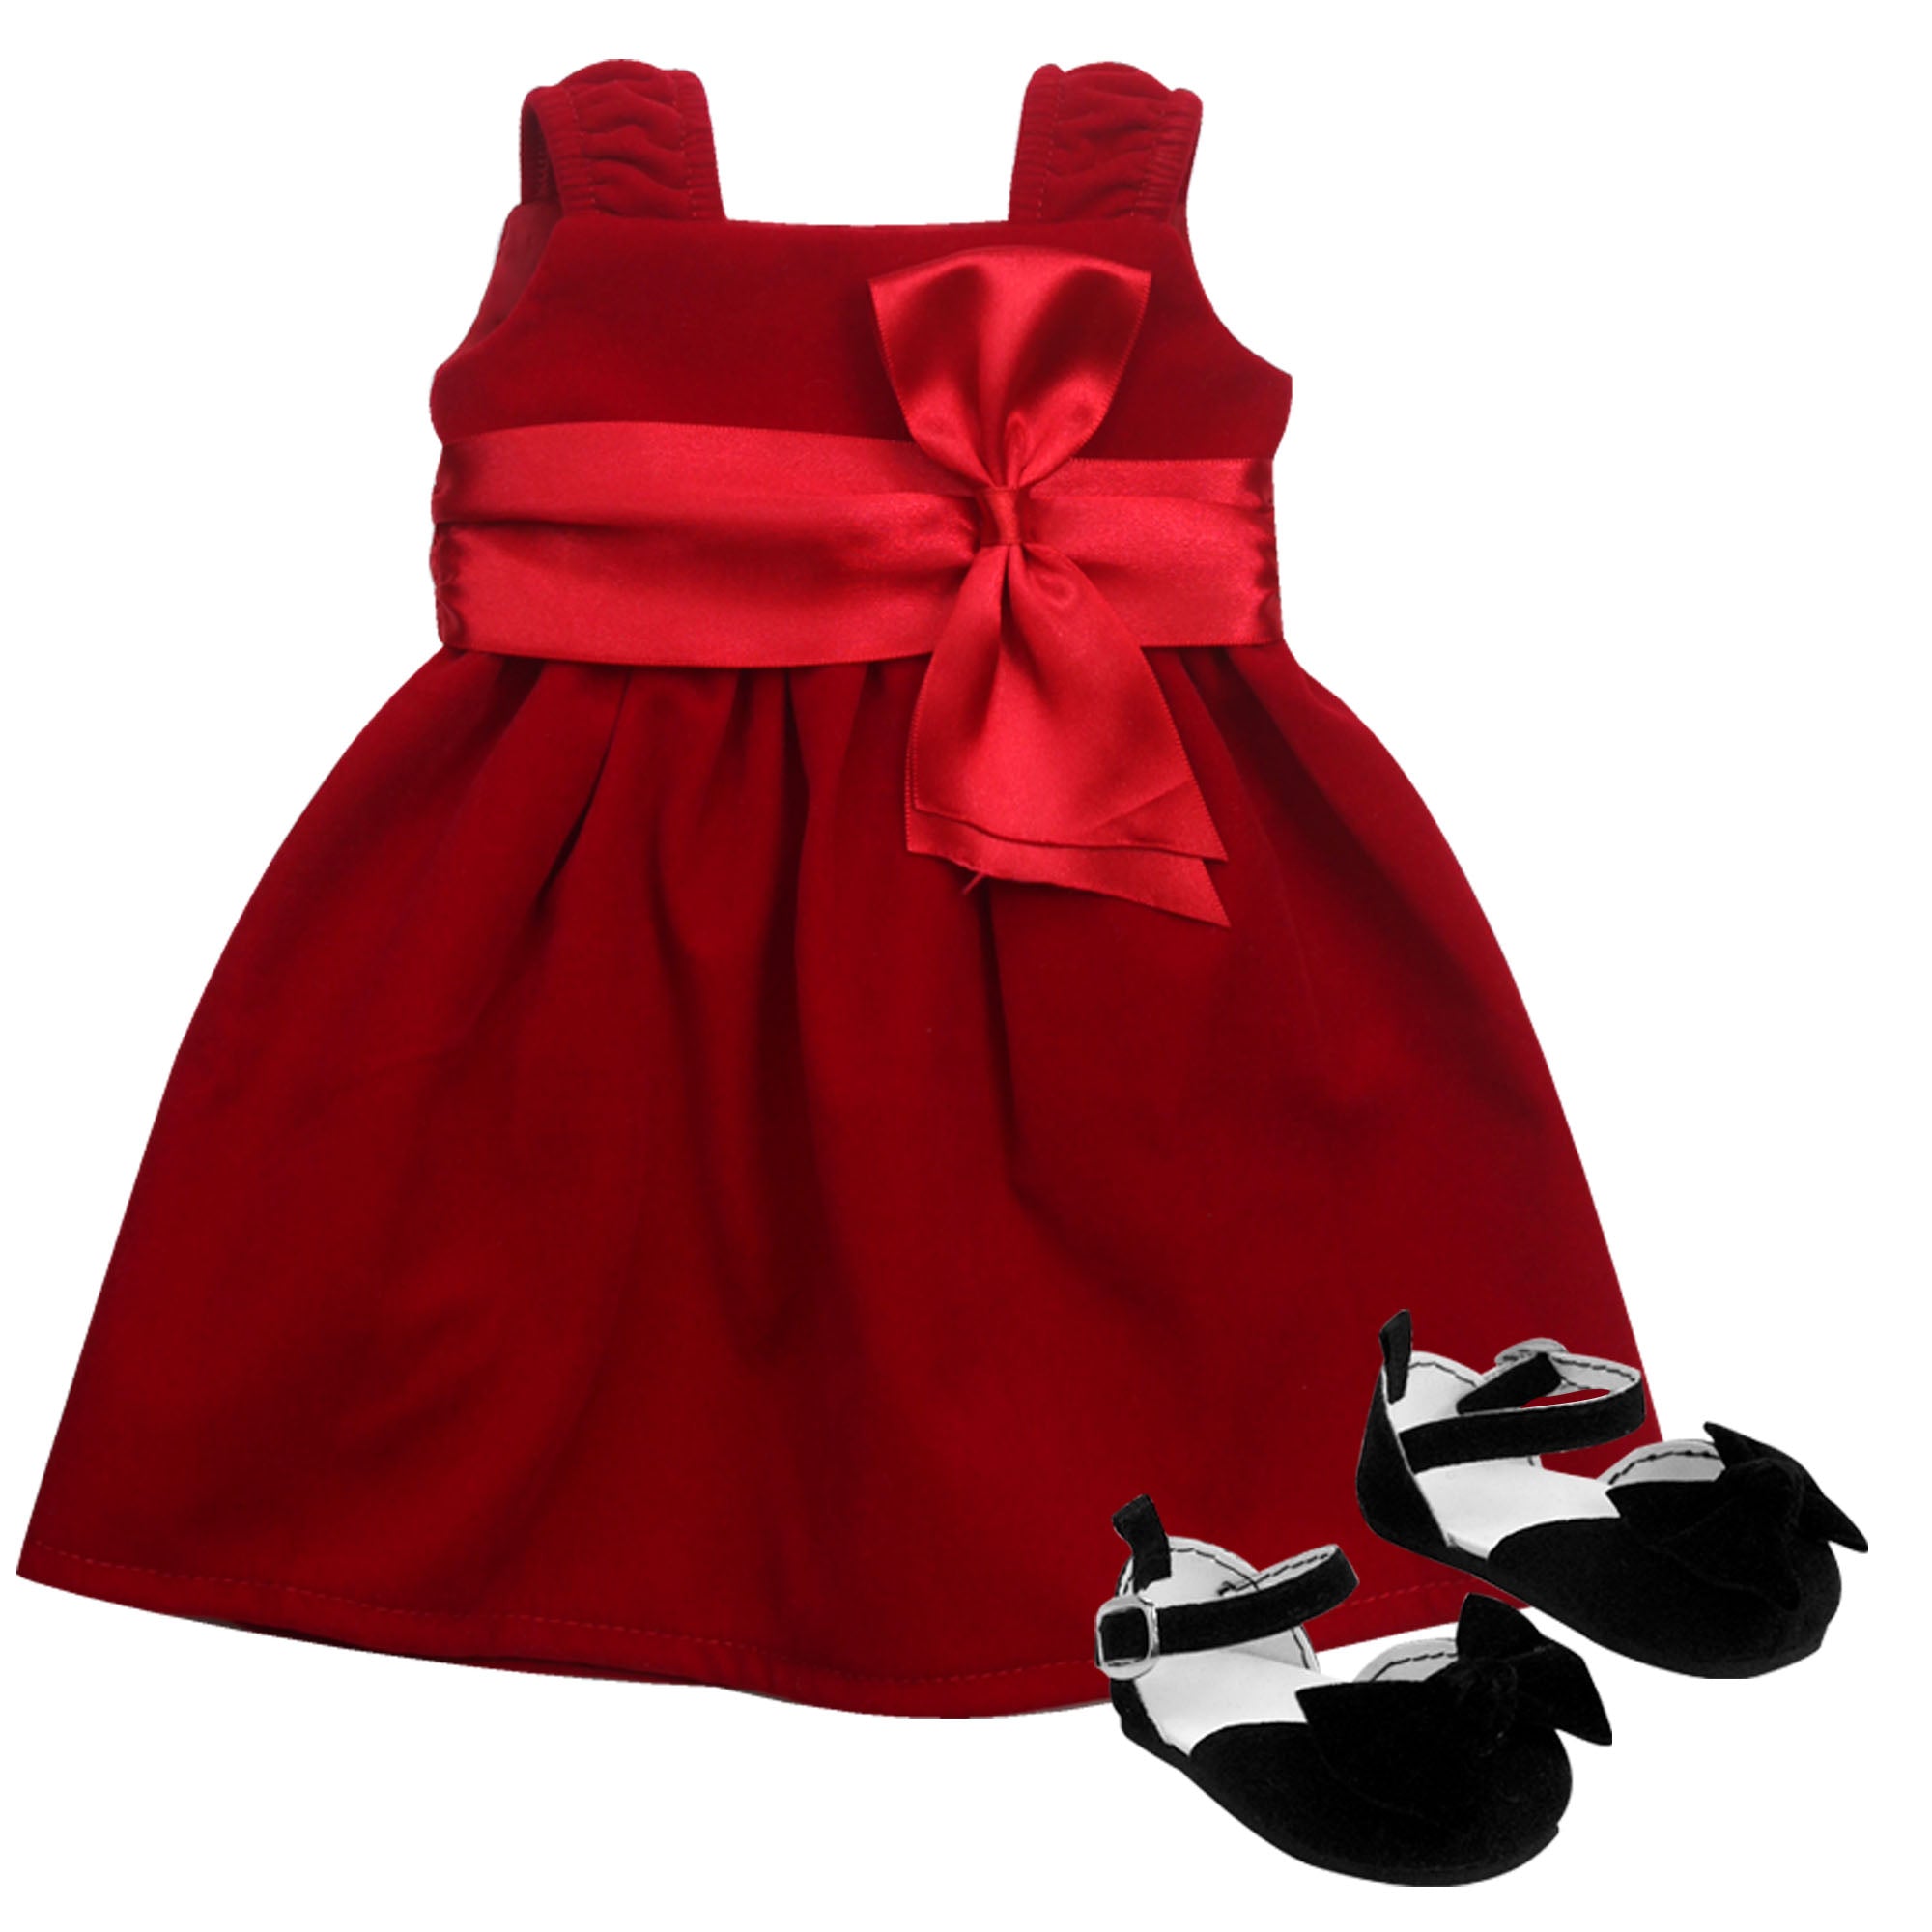 Sophia’s Velvet Holiday Dress with Satin Ribbon, Vertical Bow, & Gathered Empire Waistline and Shoes for 18” Dolls, Red/Black